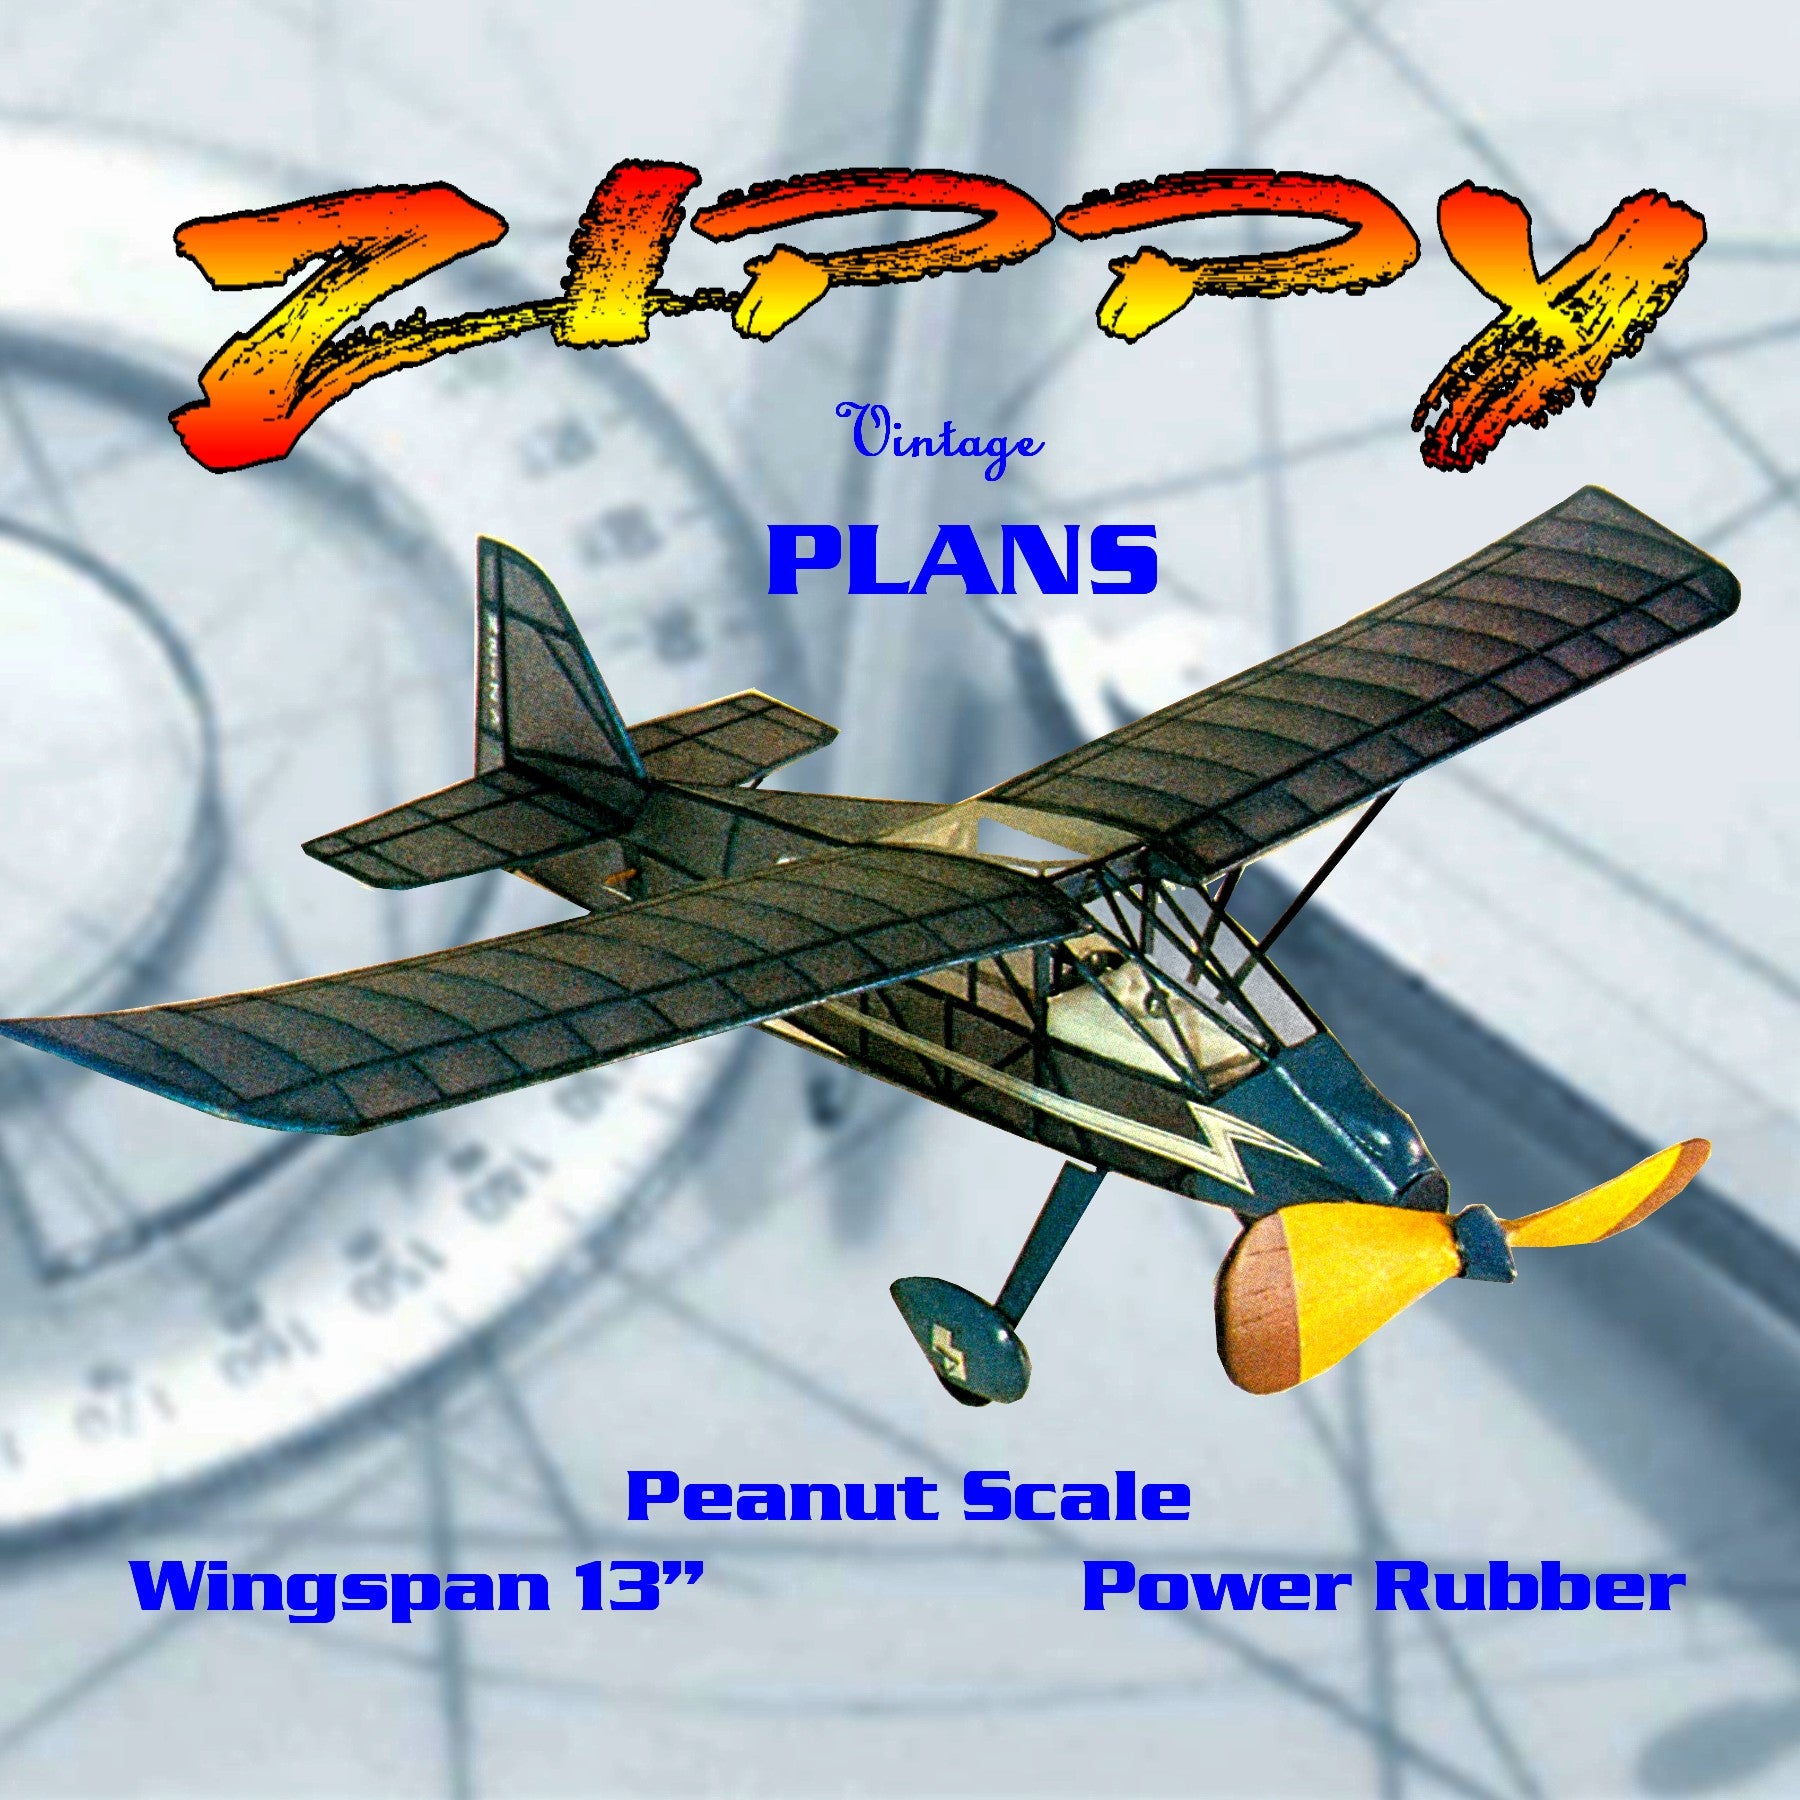 full size printed plans peanut scale "zippy sport"  blends into the sky too well on those long flights